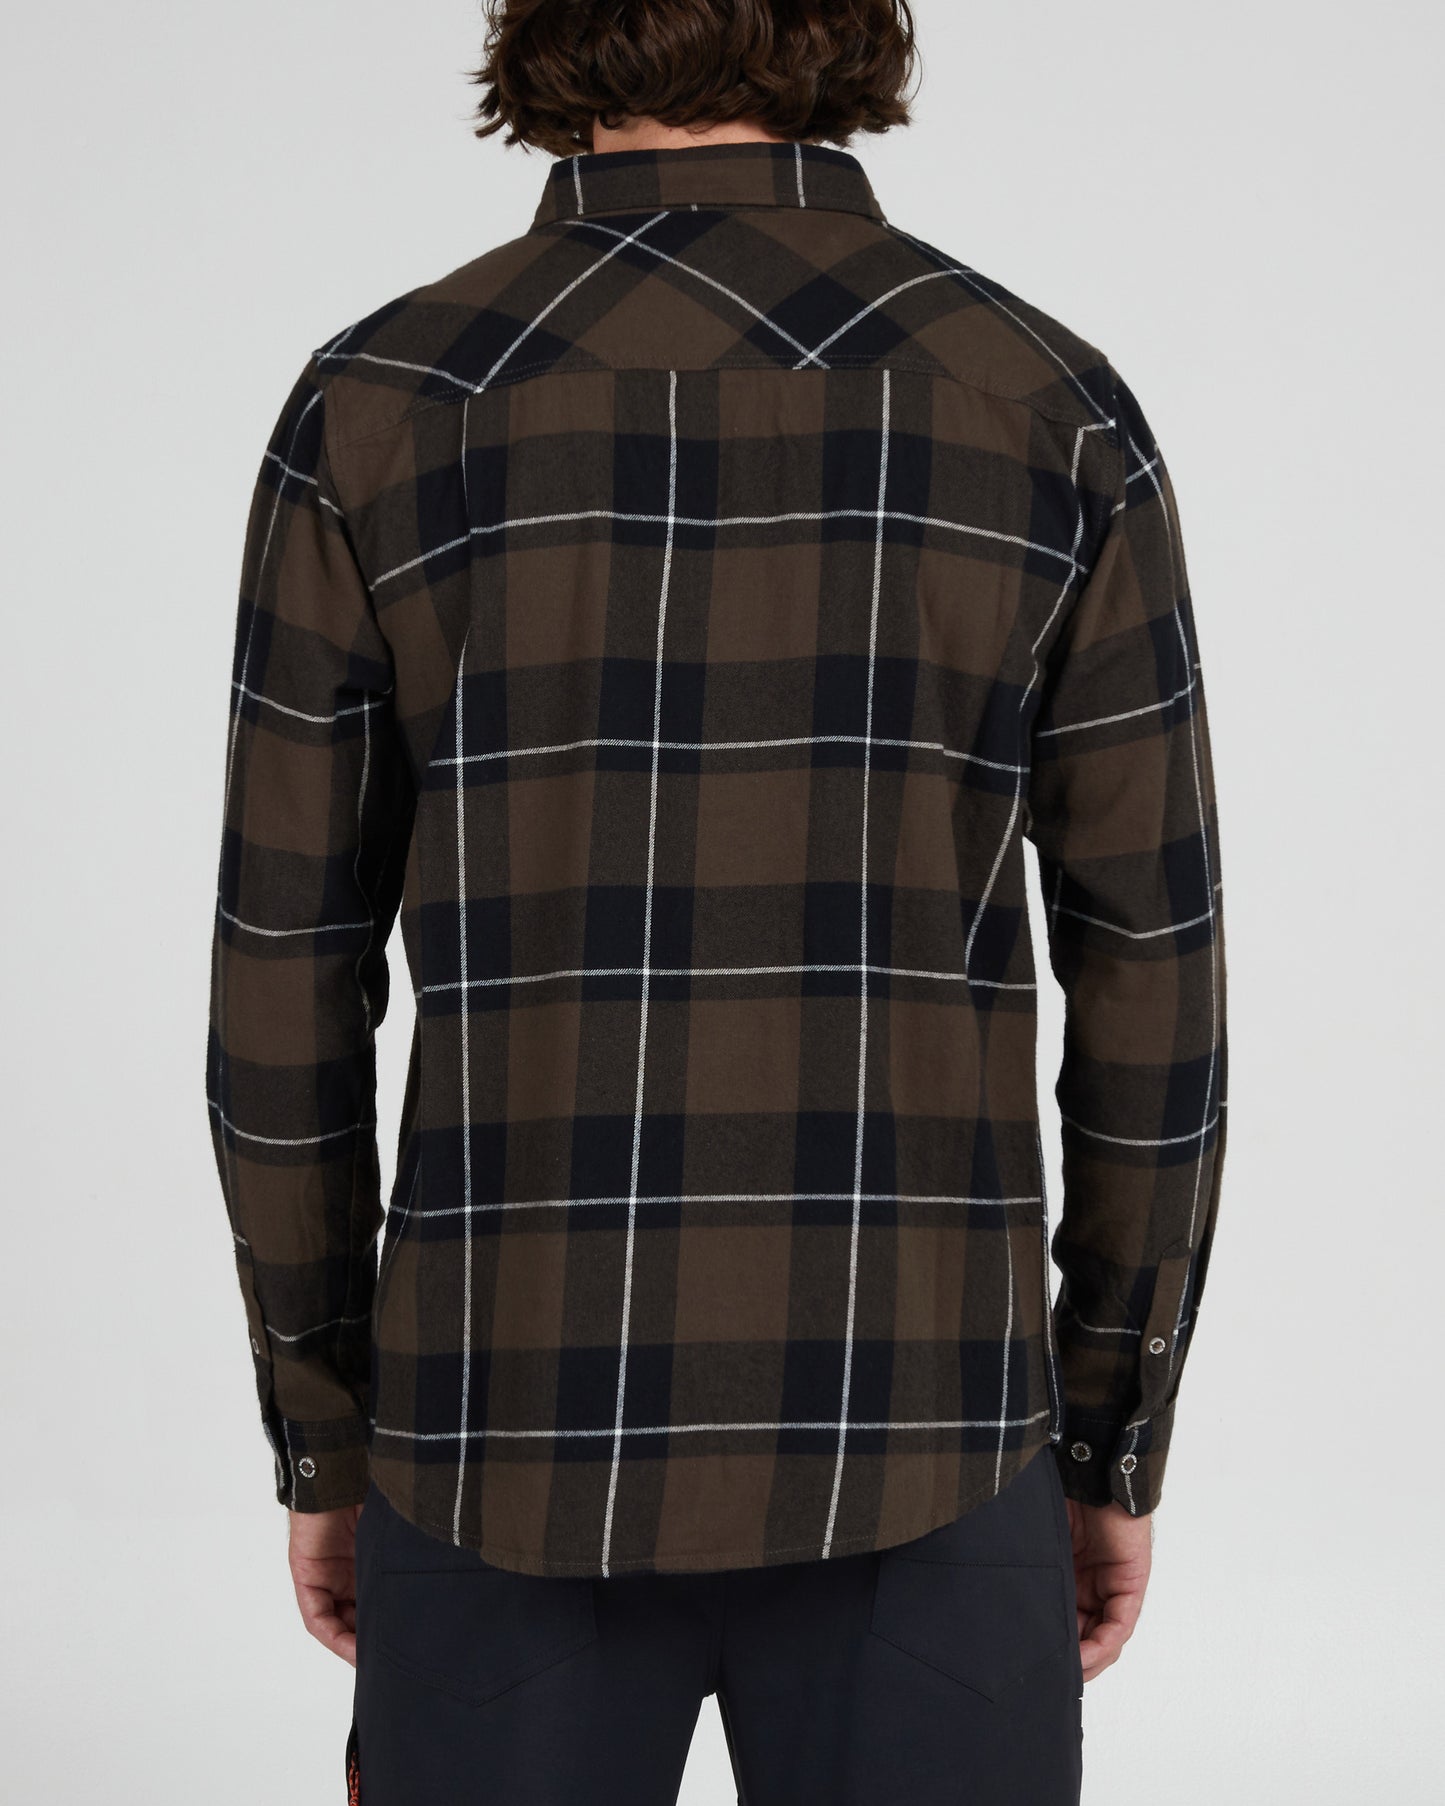 On body back of the First Light Black/Brown Flannel